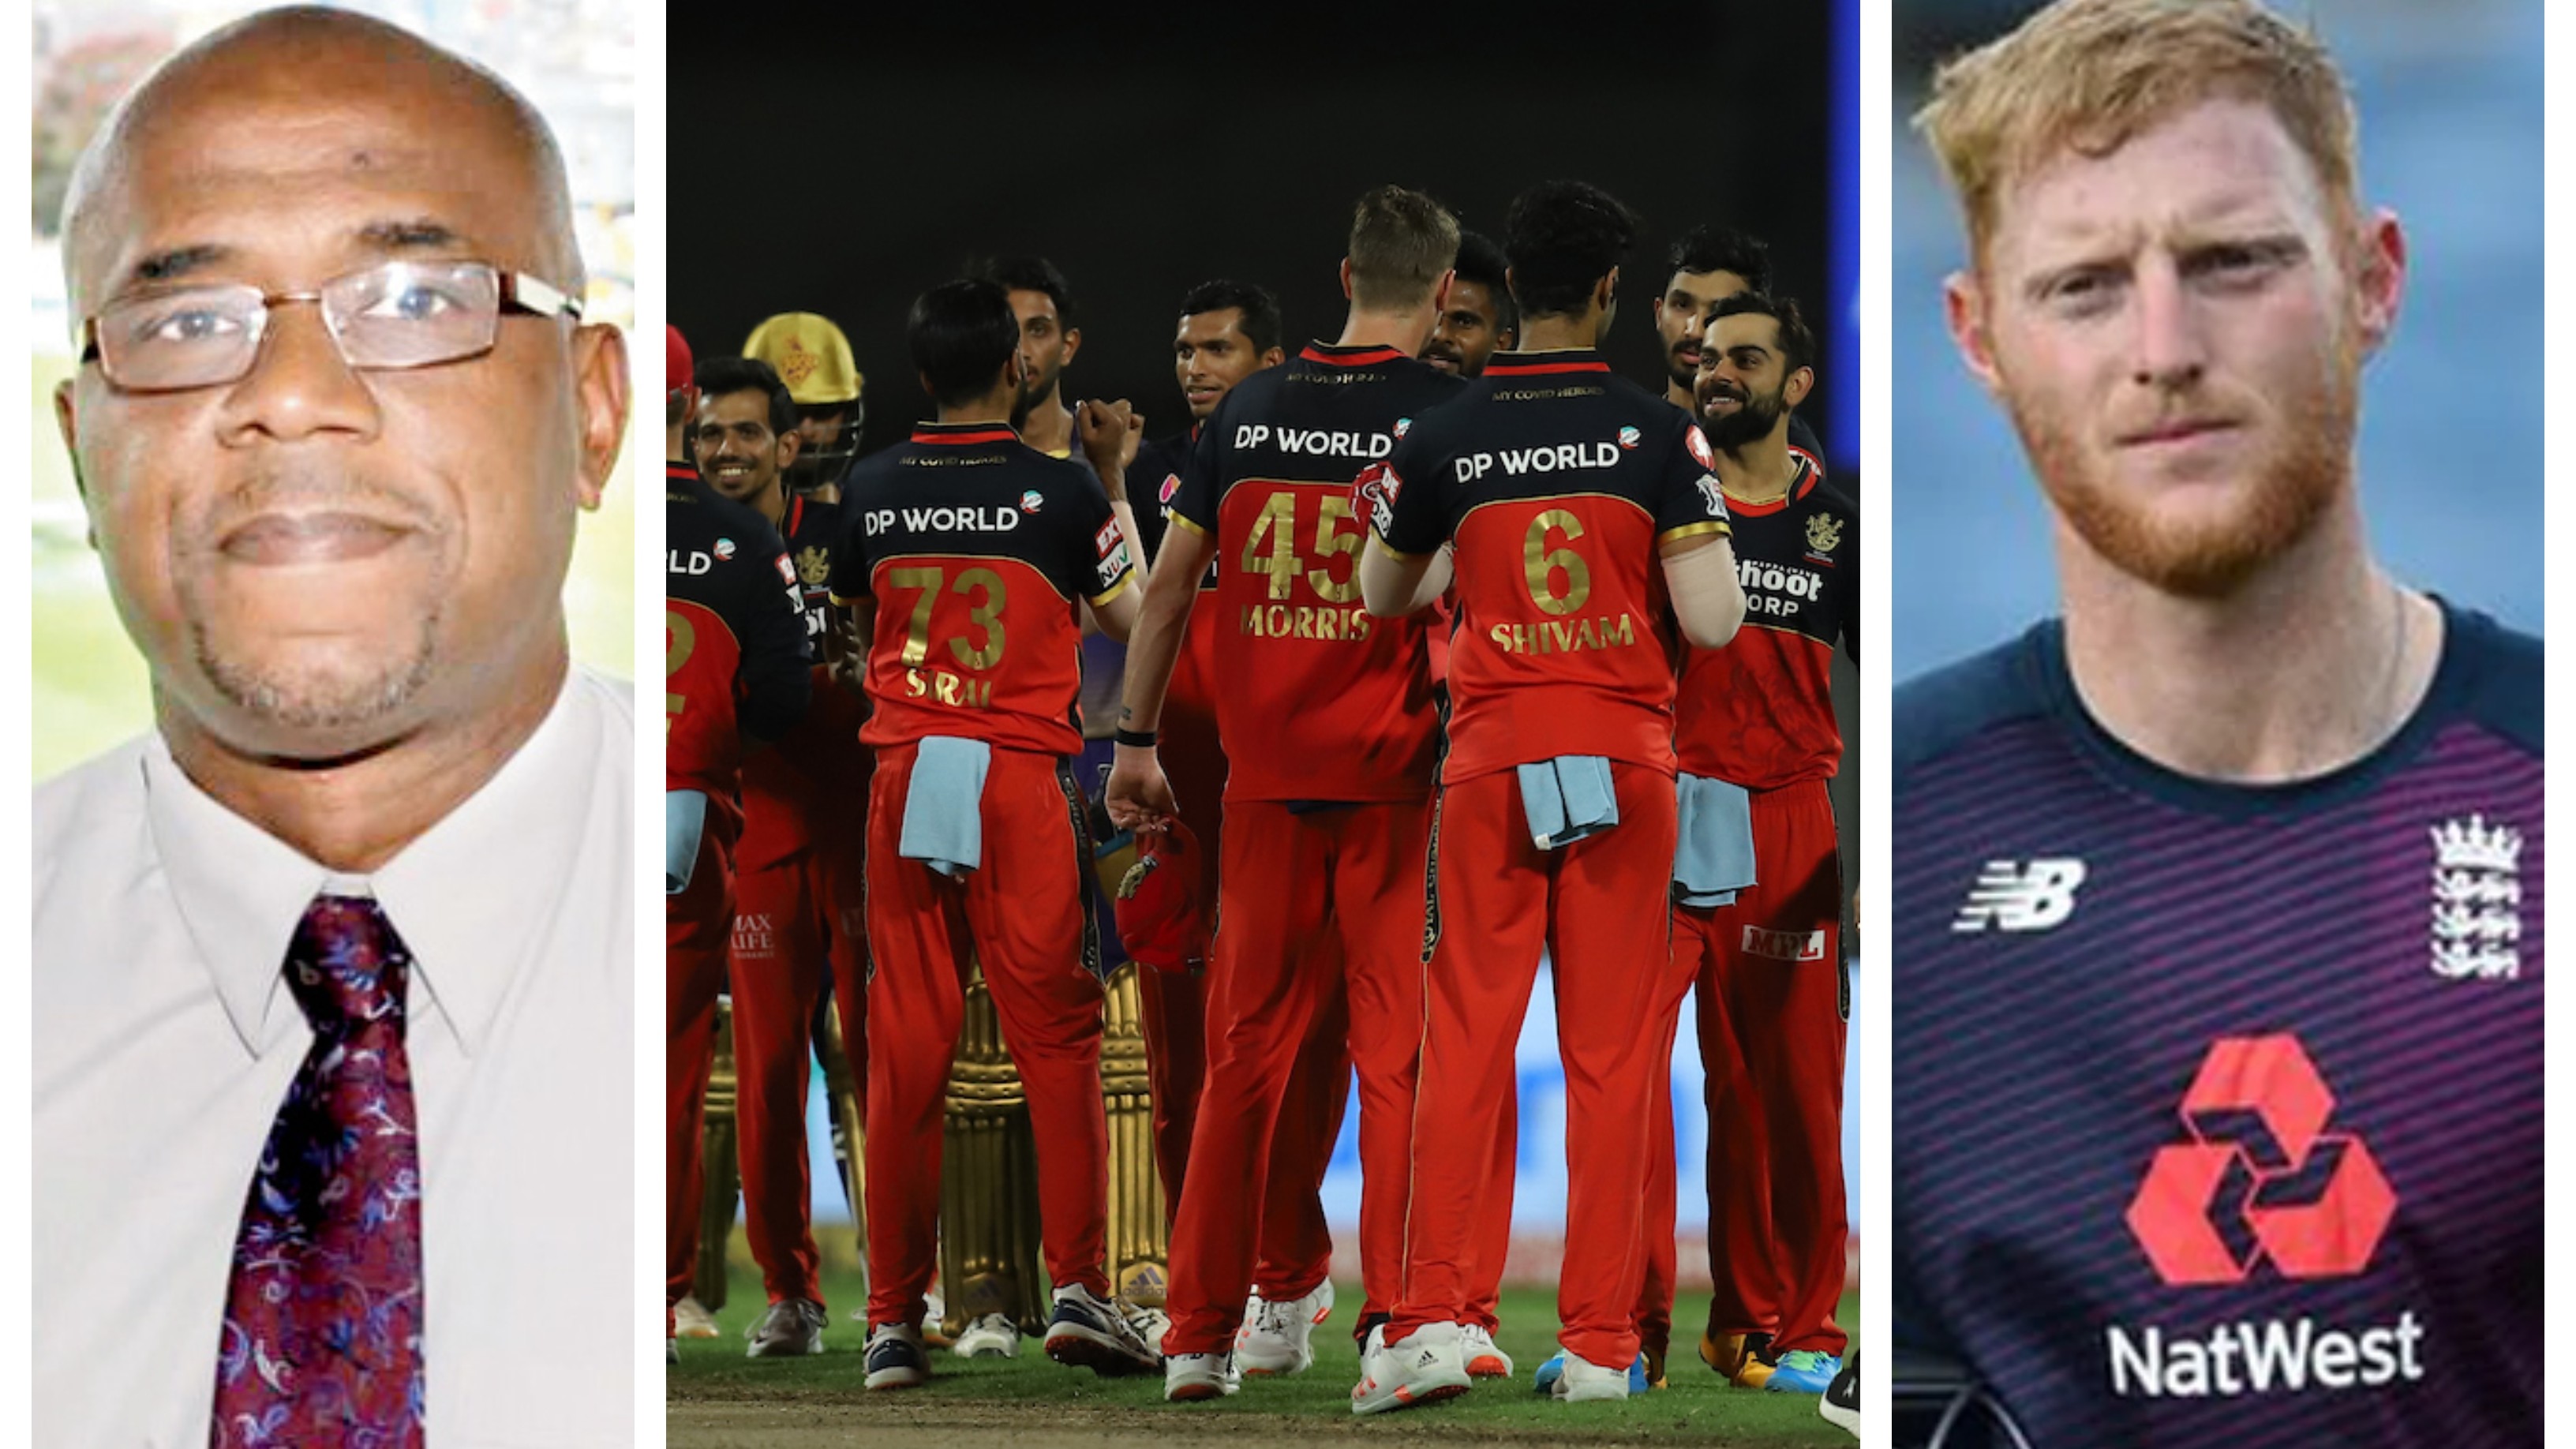 IPL 2020: Cricket fraternity reacts to RCB’s crushing 82-run win over KKR